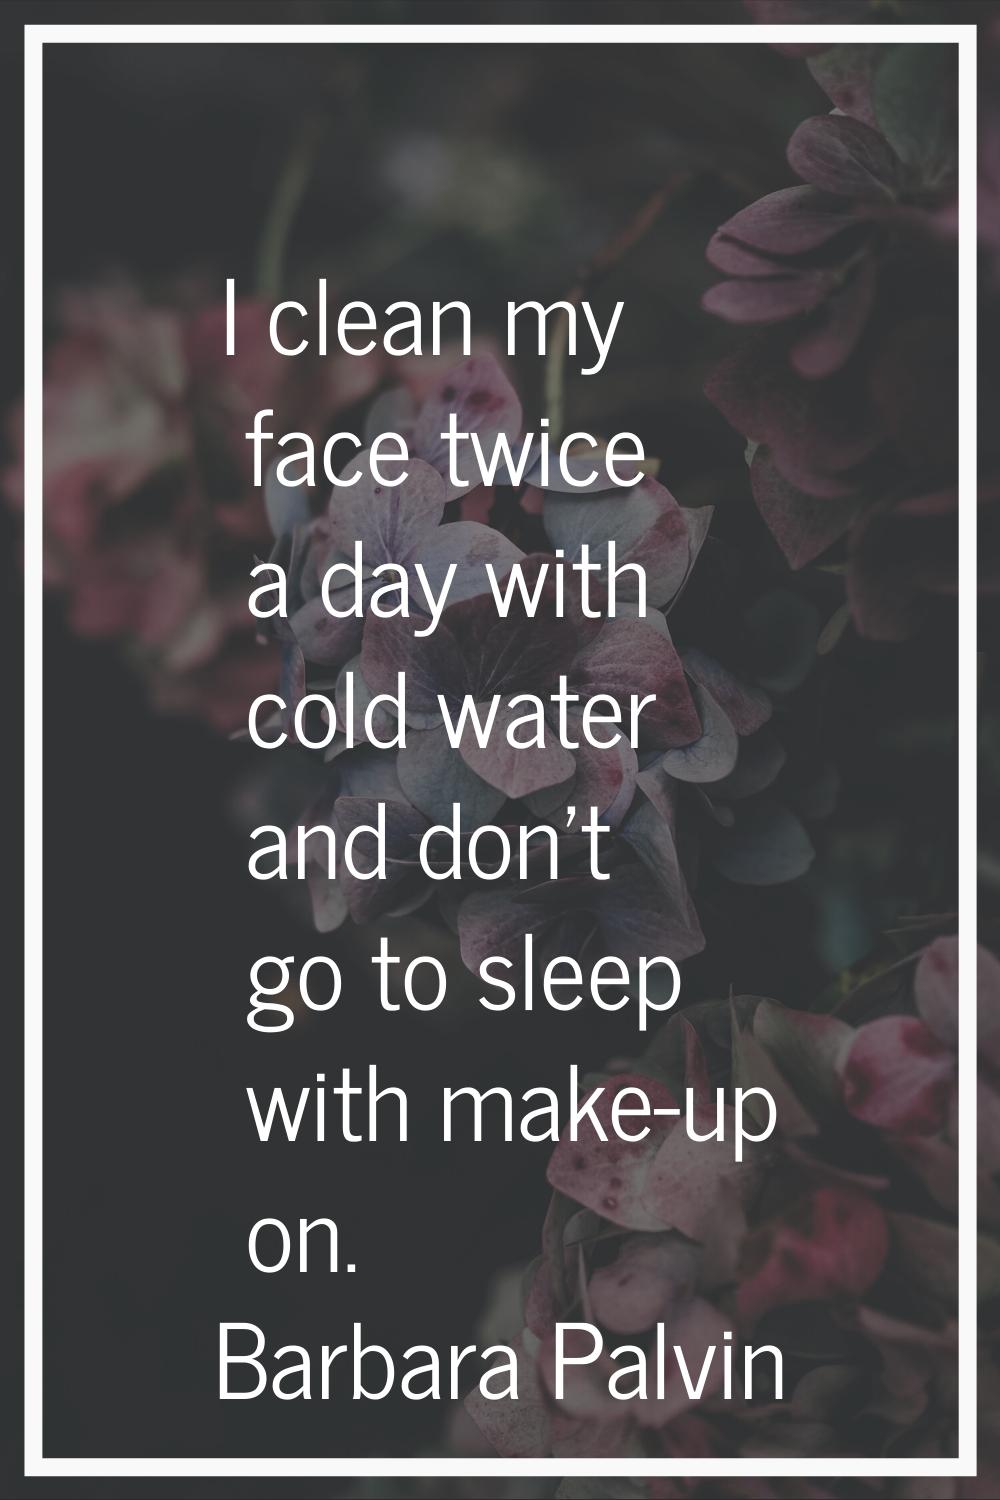 I clean my face twice a day with cold water and don't go to sleep with make-up on.